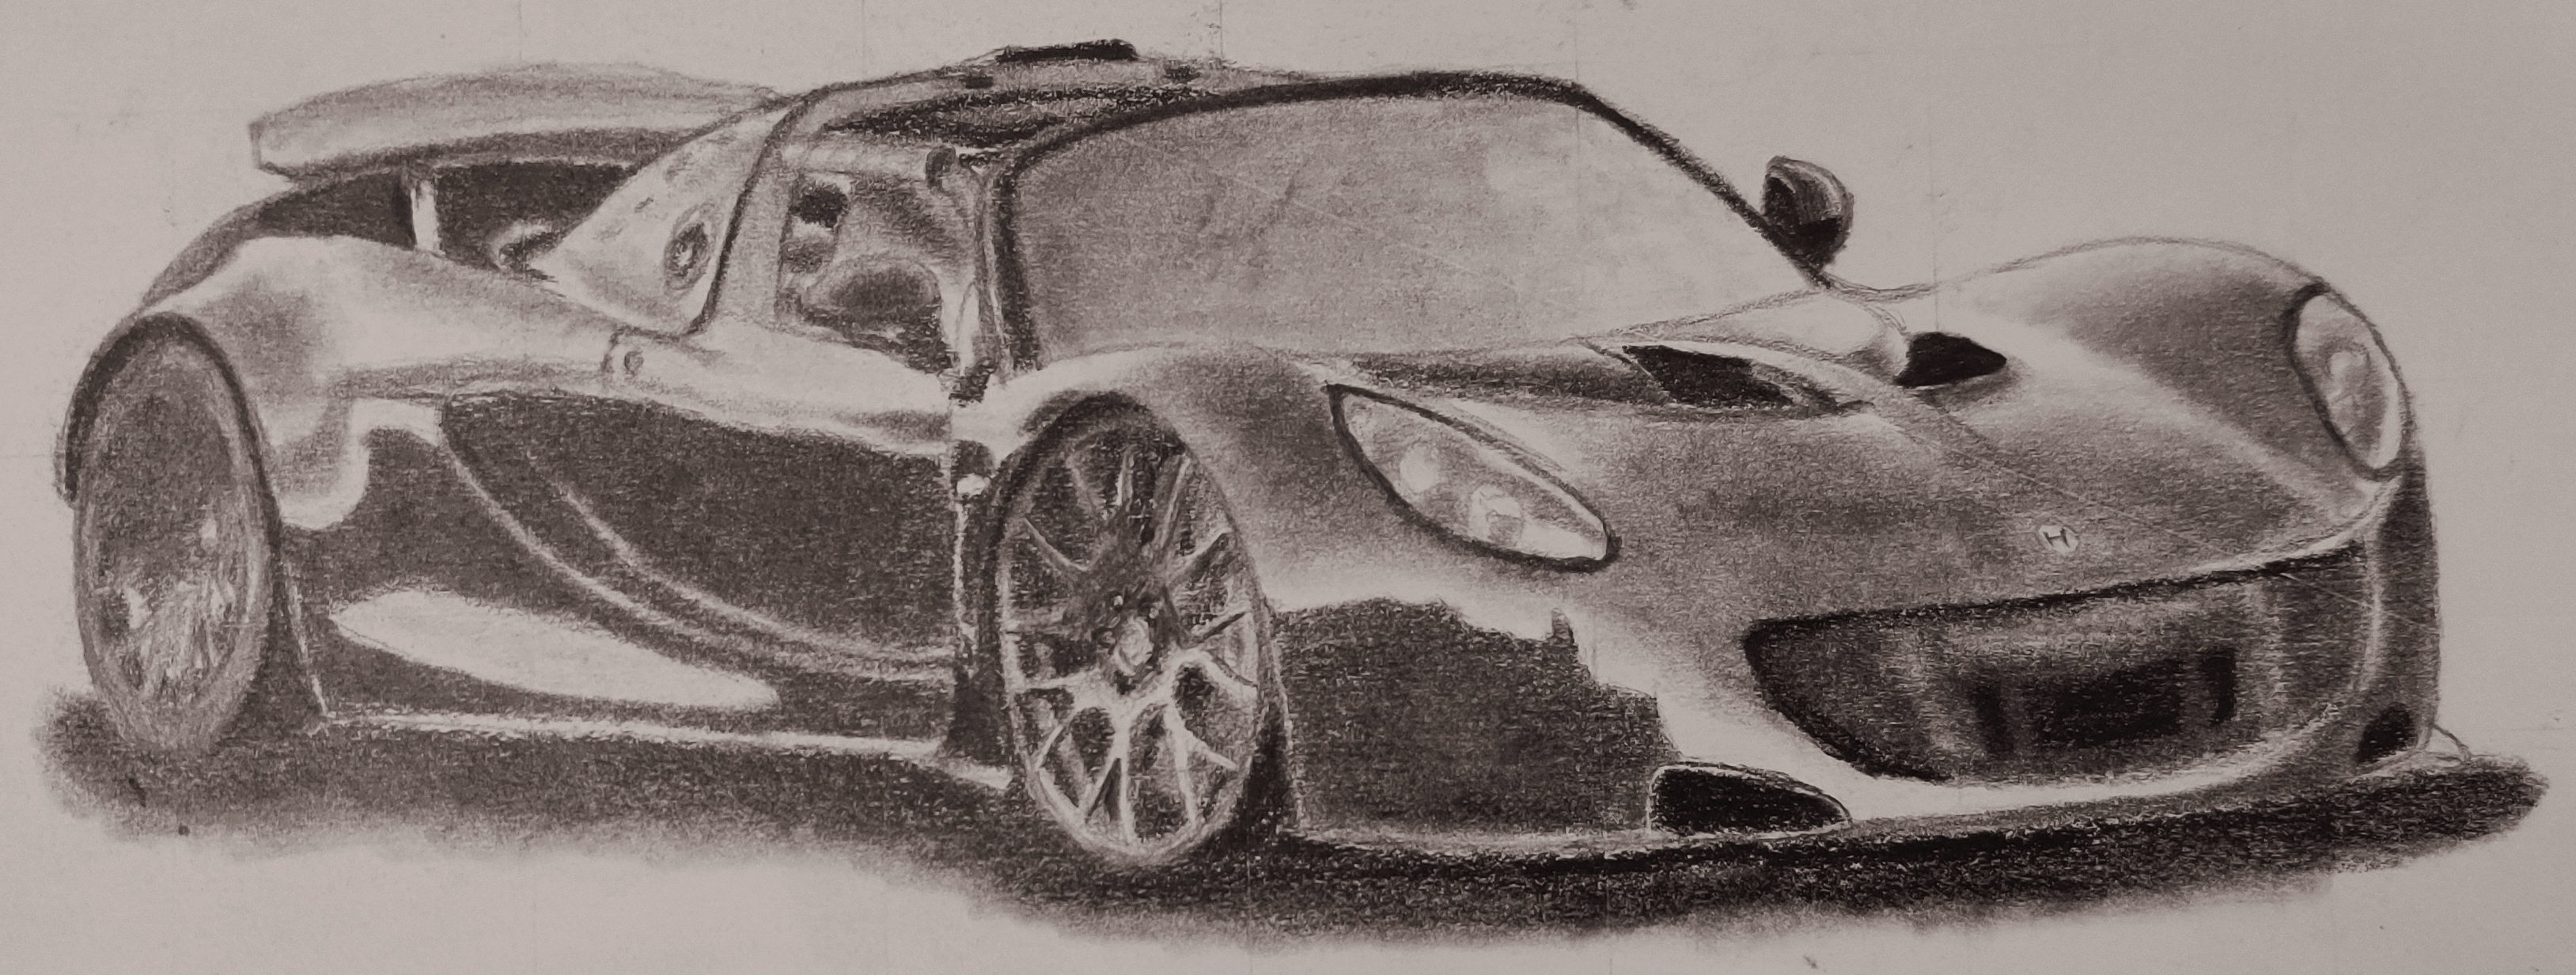 A drawing of a Hennessey Venom GT in pencil.